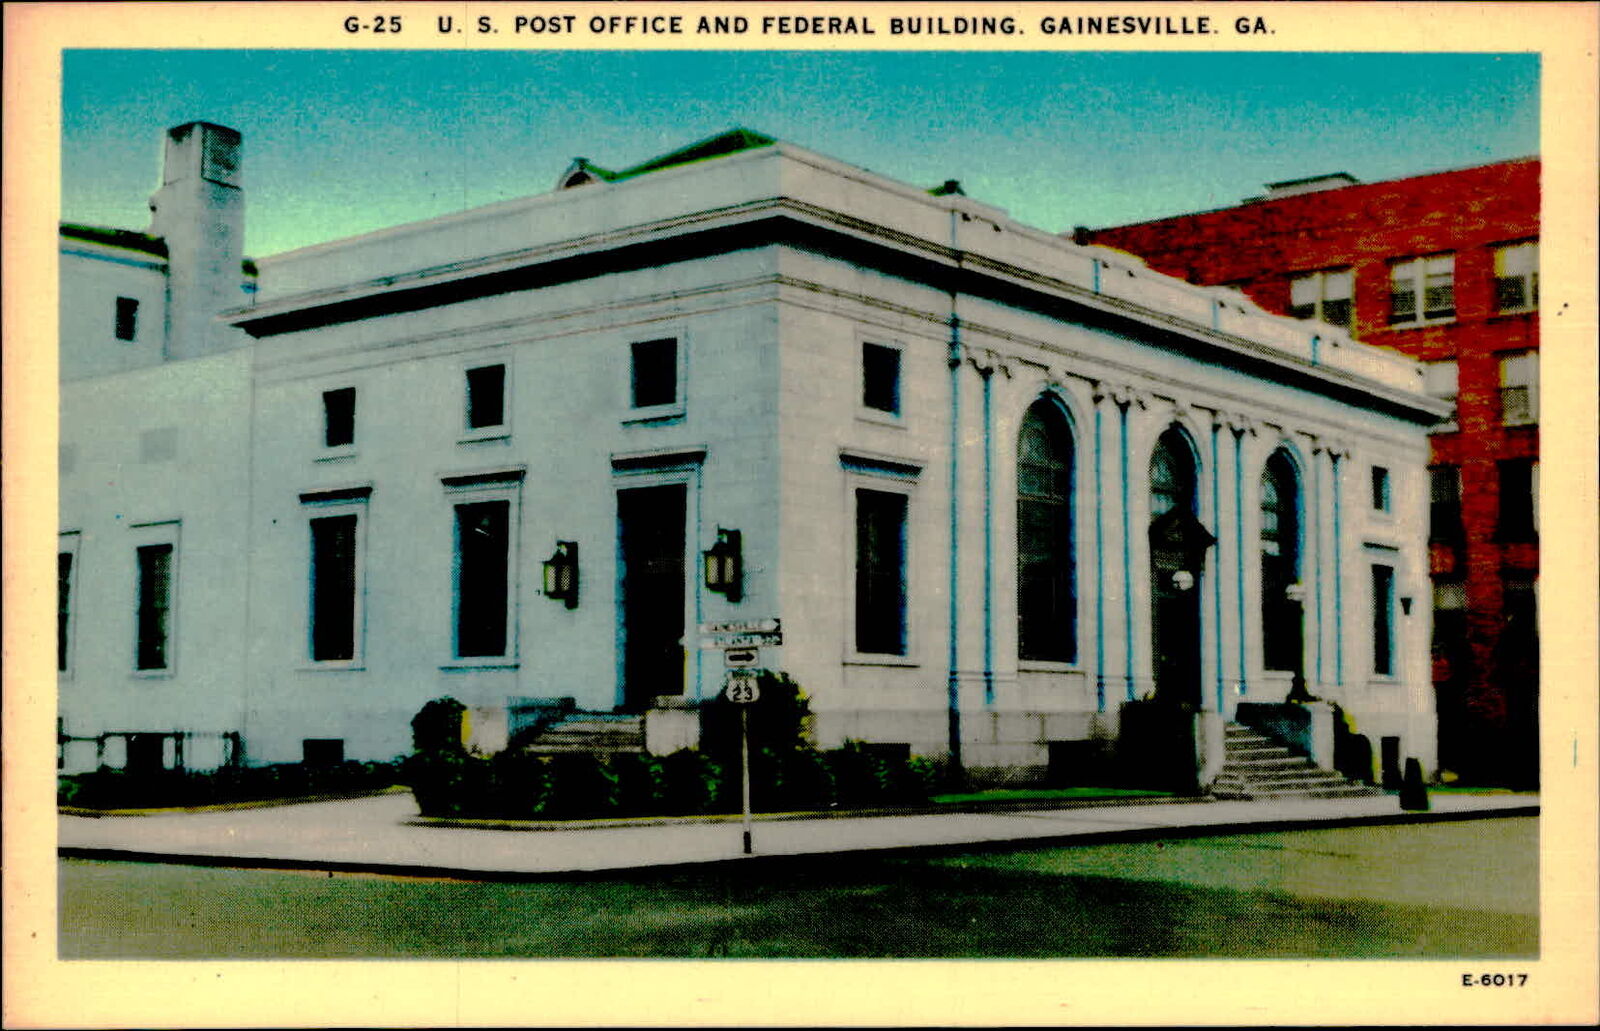 Postcard: G-25 U.S. POST OFFICE AND FEDERAL BUILDING. GAINESVILLE. GA.